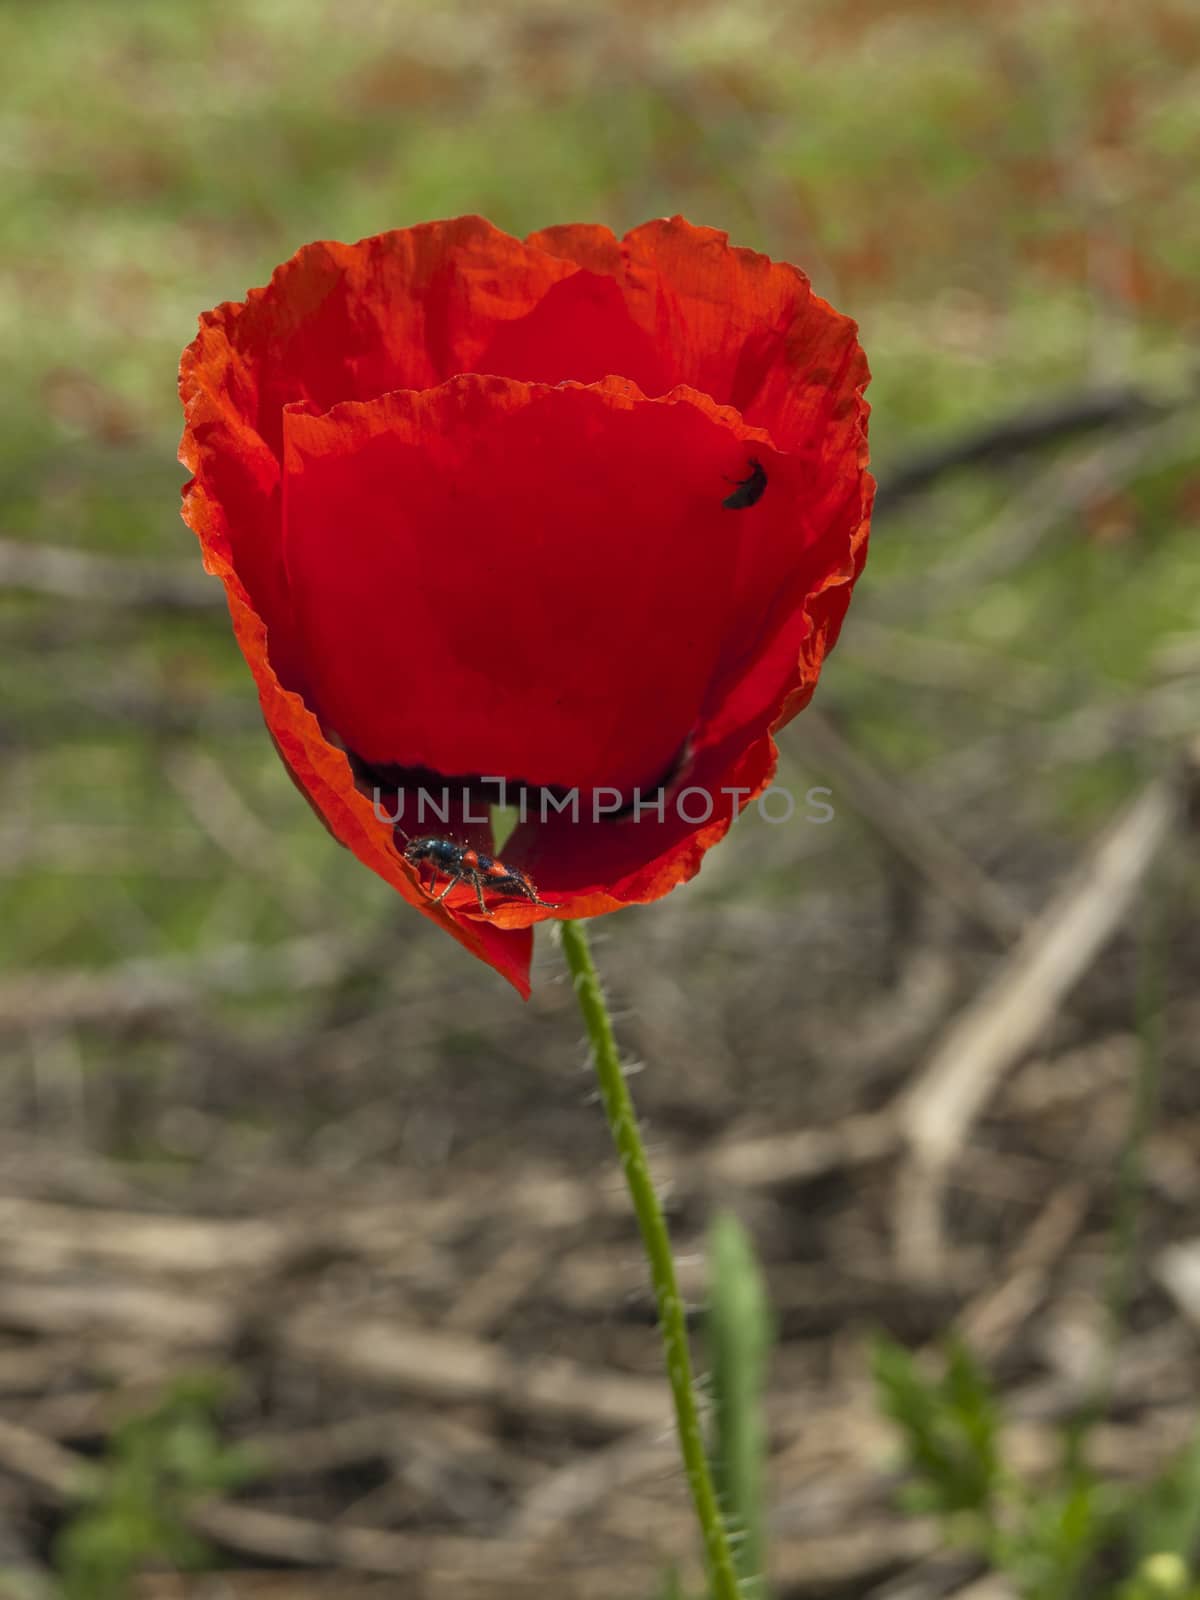 The red poppy by Trala